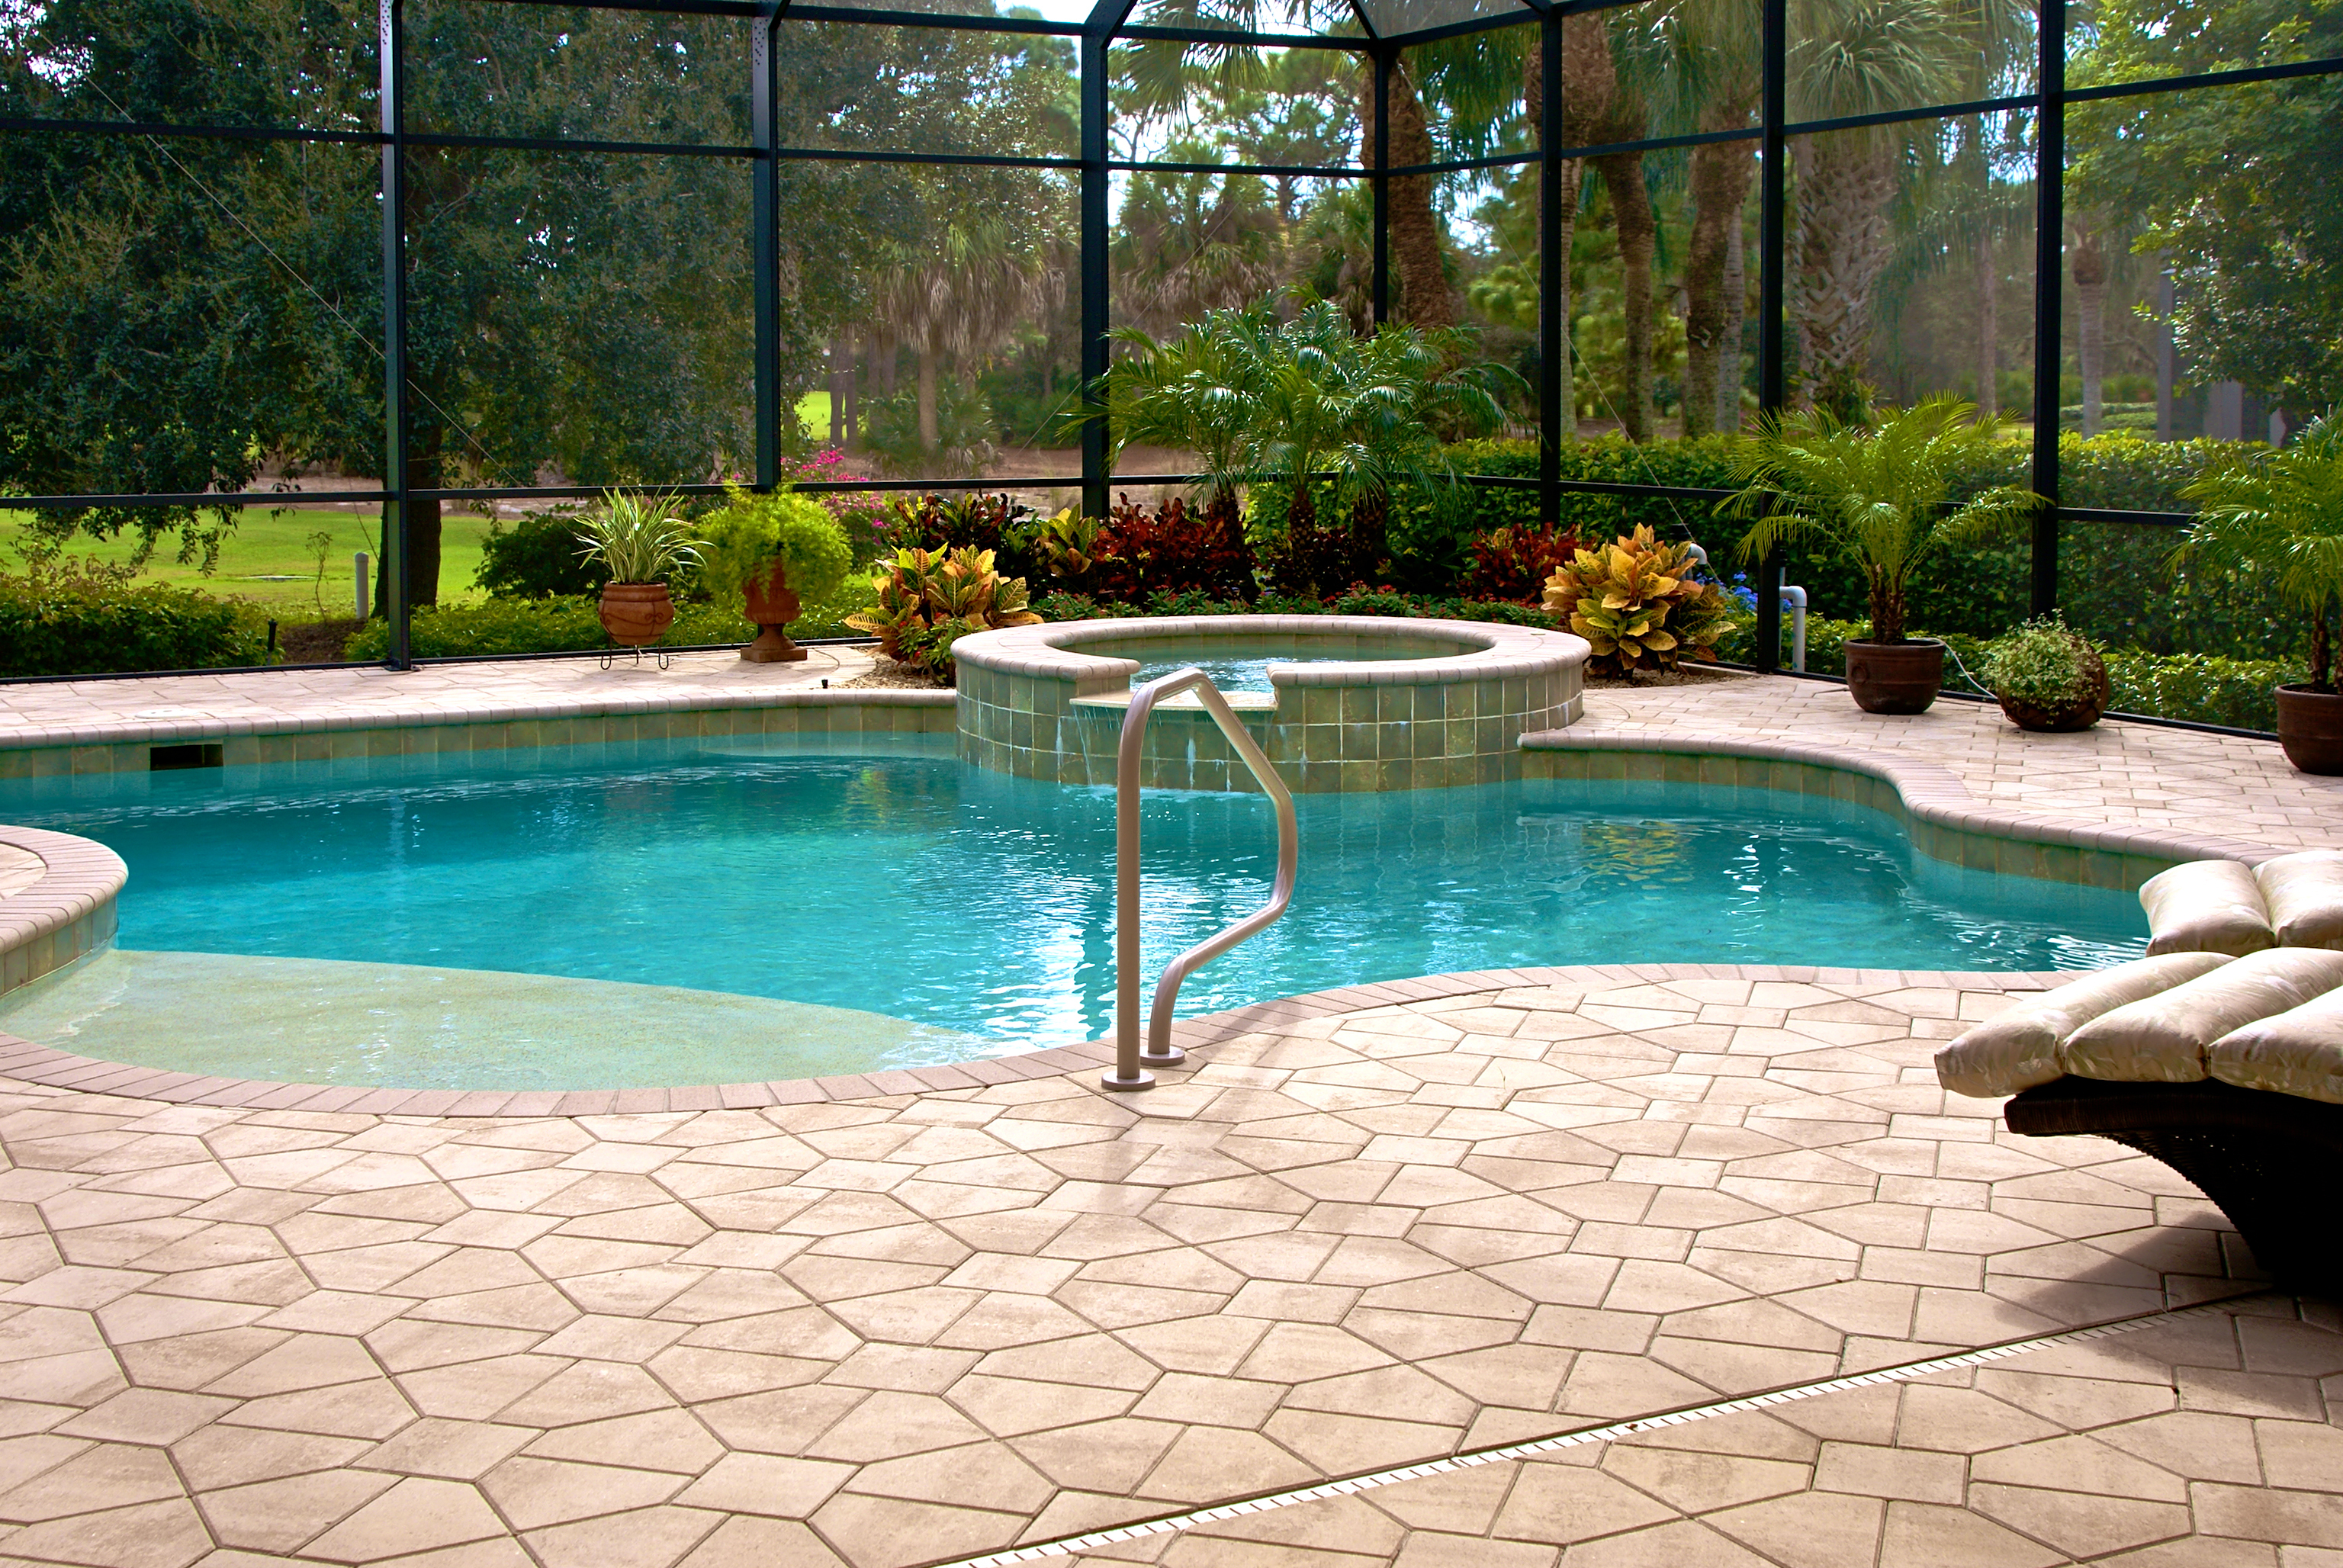 https://www.paversblocks.com/wp-content/uploads/2015/06/Brick-pool-coping-swimming-pool-with-plants-and-hardscape-design-oval-pool-and-hot-tub-pool-2.jpg